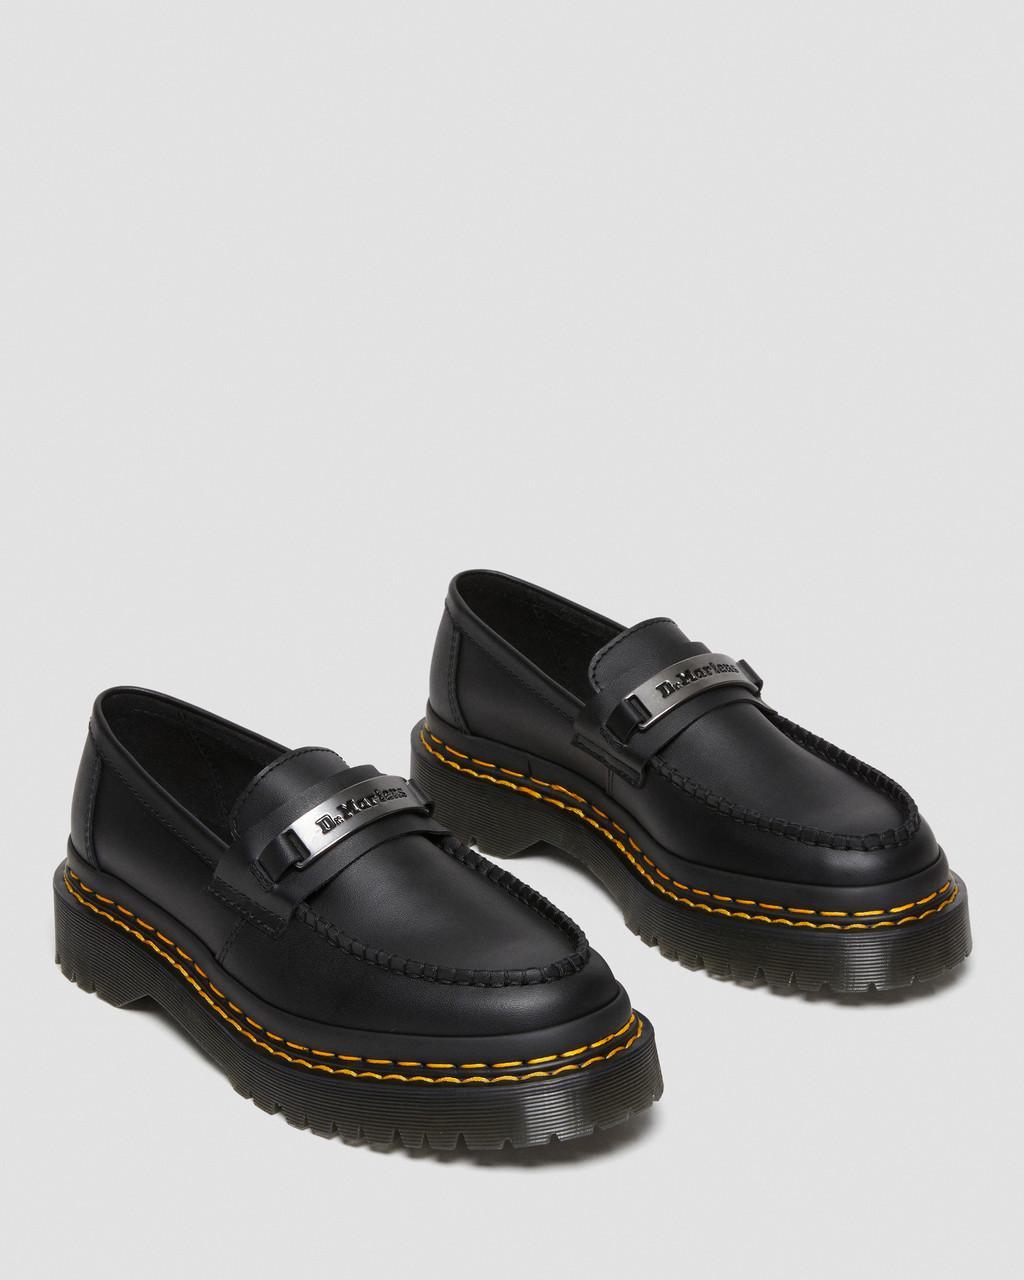 Stratford on Avon Grootte Dochter Dr. Martens Penton Bex Double Stitch Leather Loafers in Black | Lyst